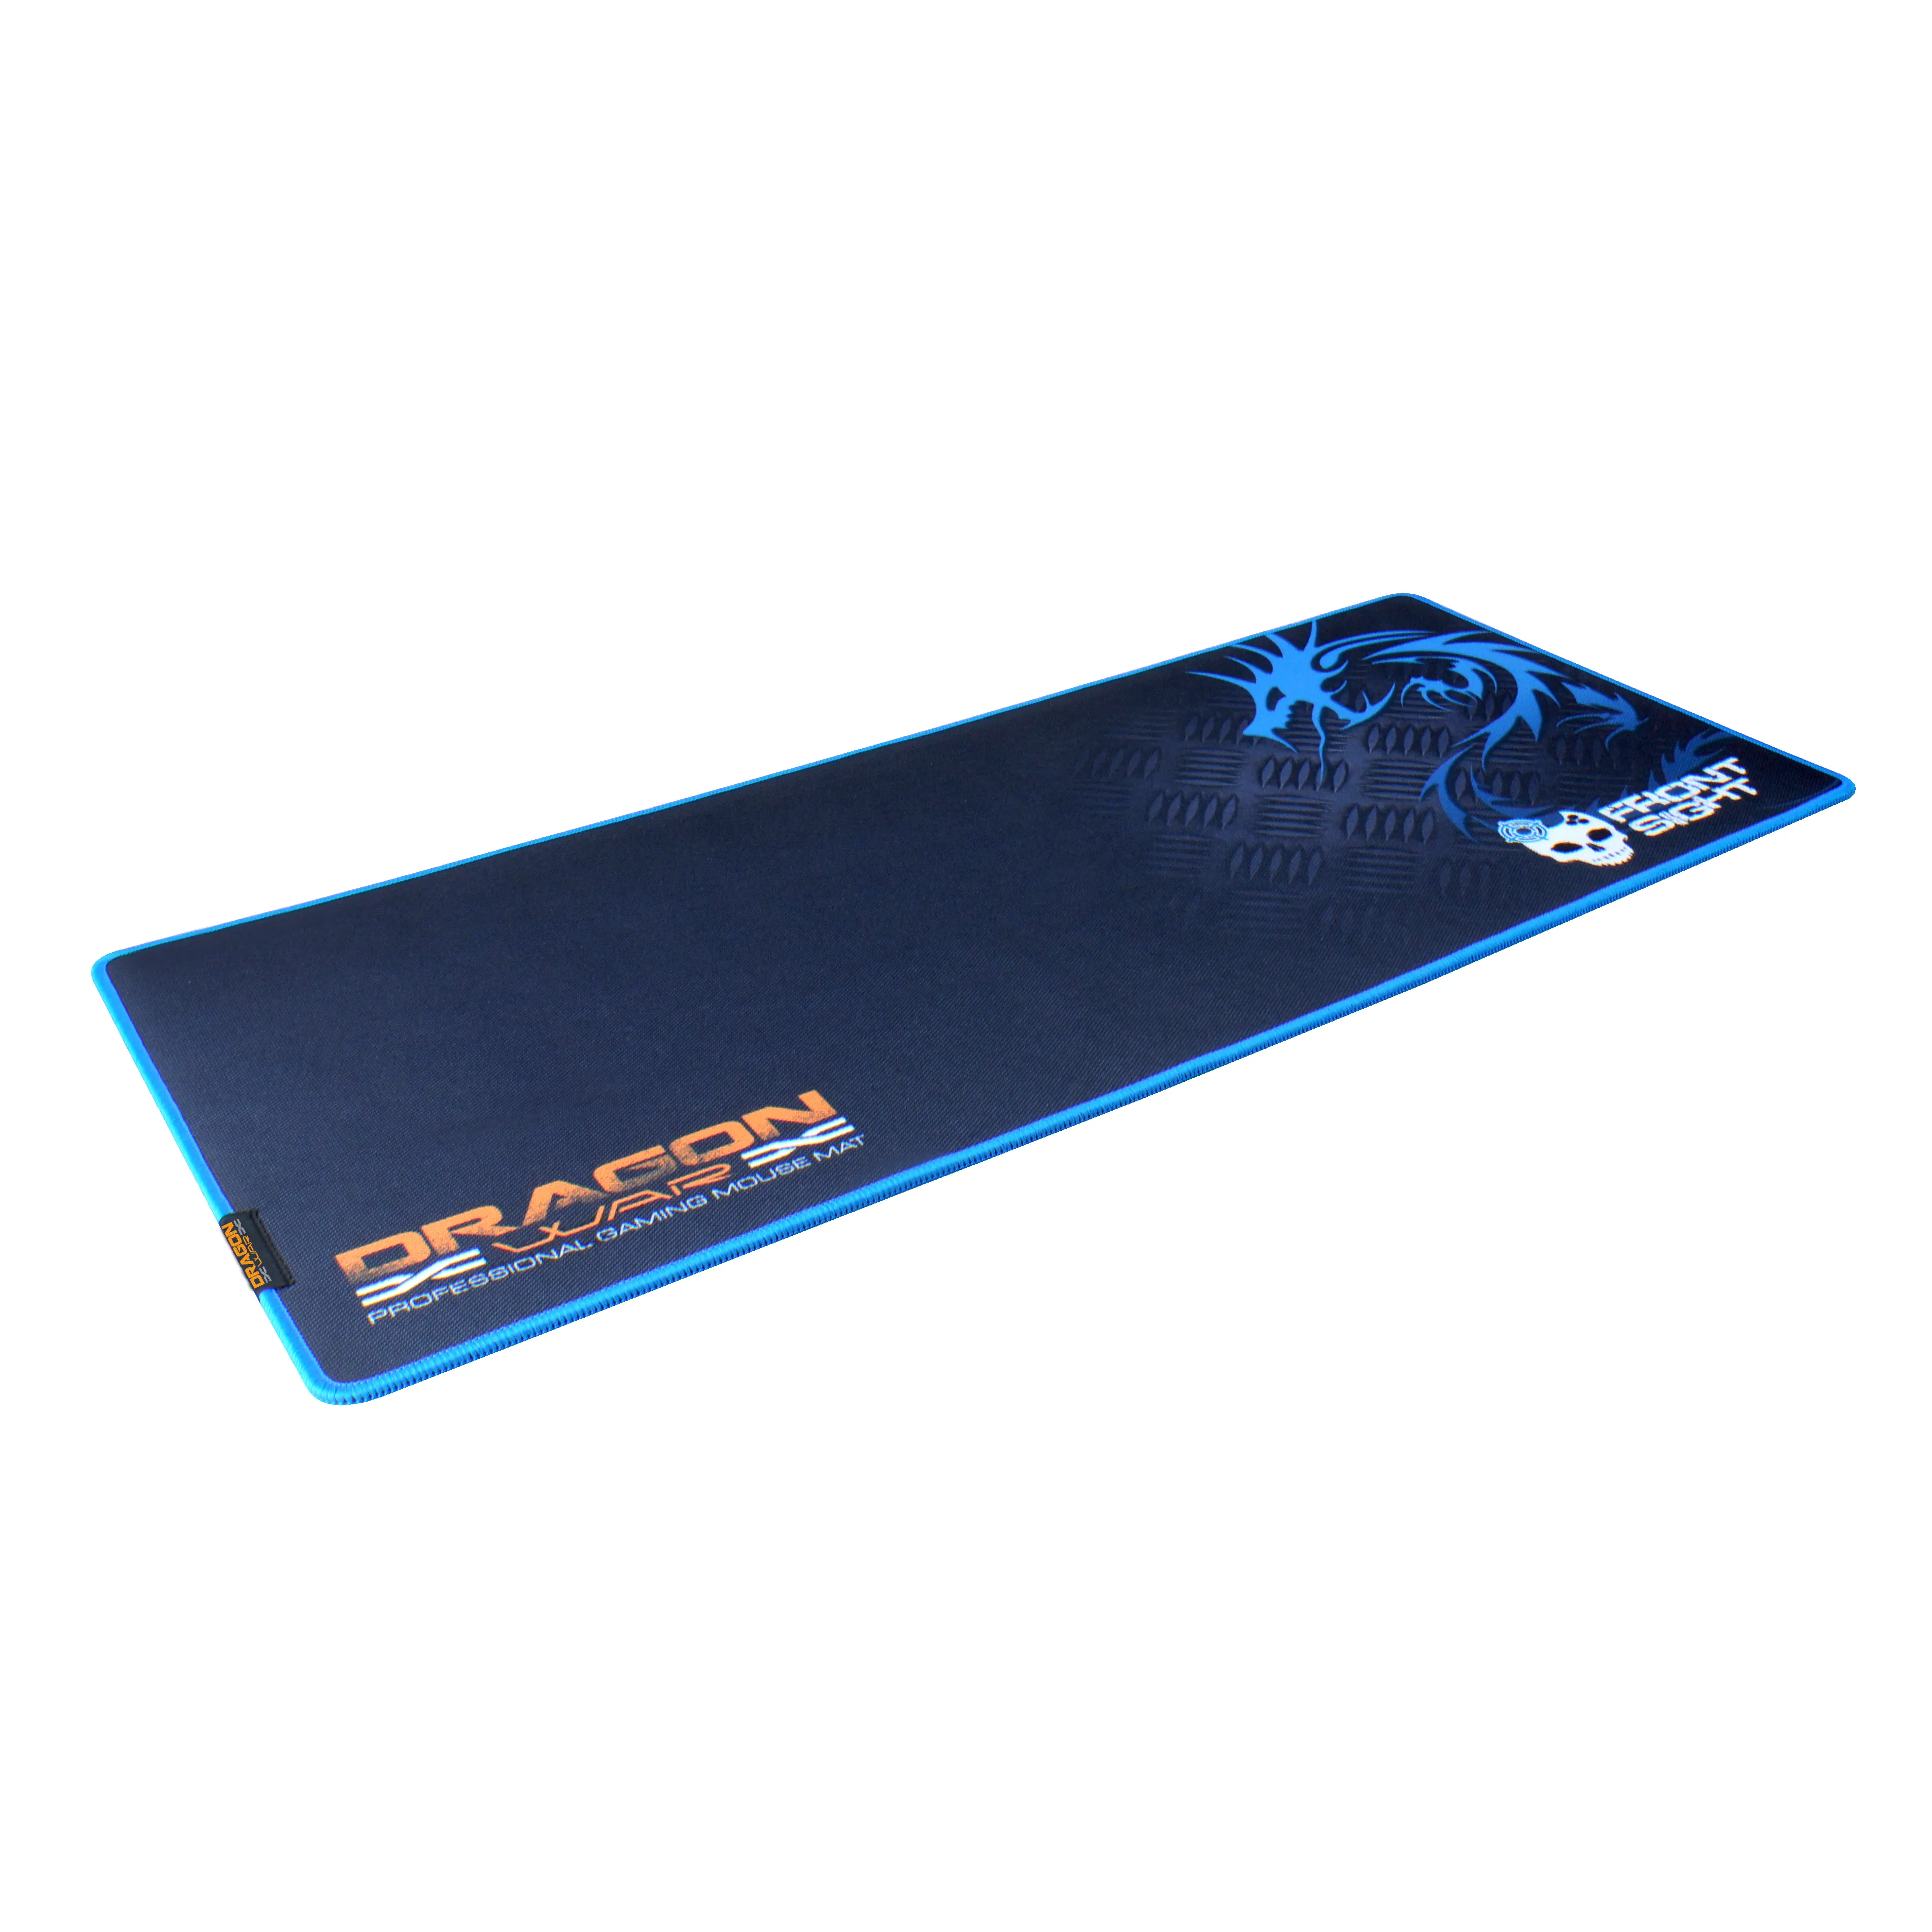 Dragon War smooth precision accuracy rubber base mat large Gaming mouse Keyboard mouse pad